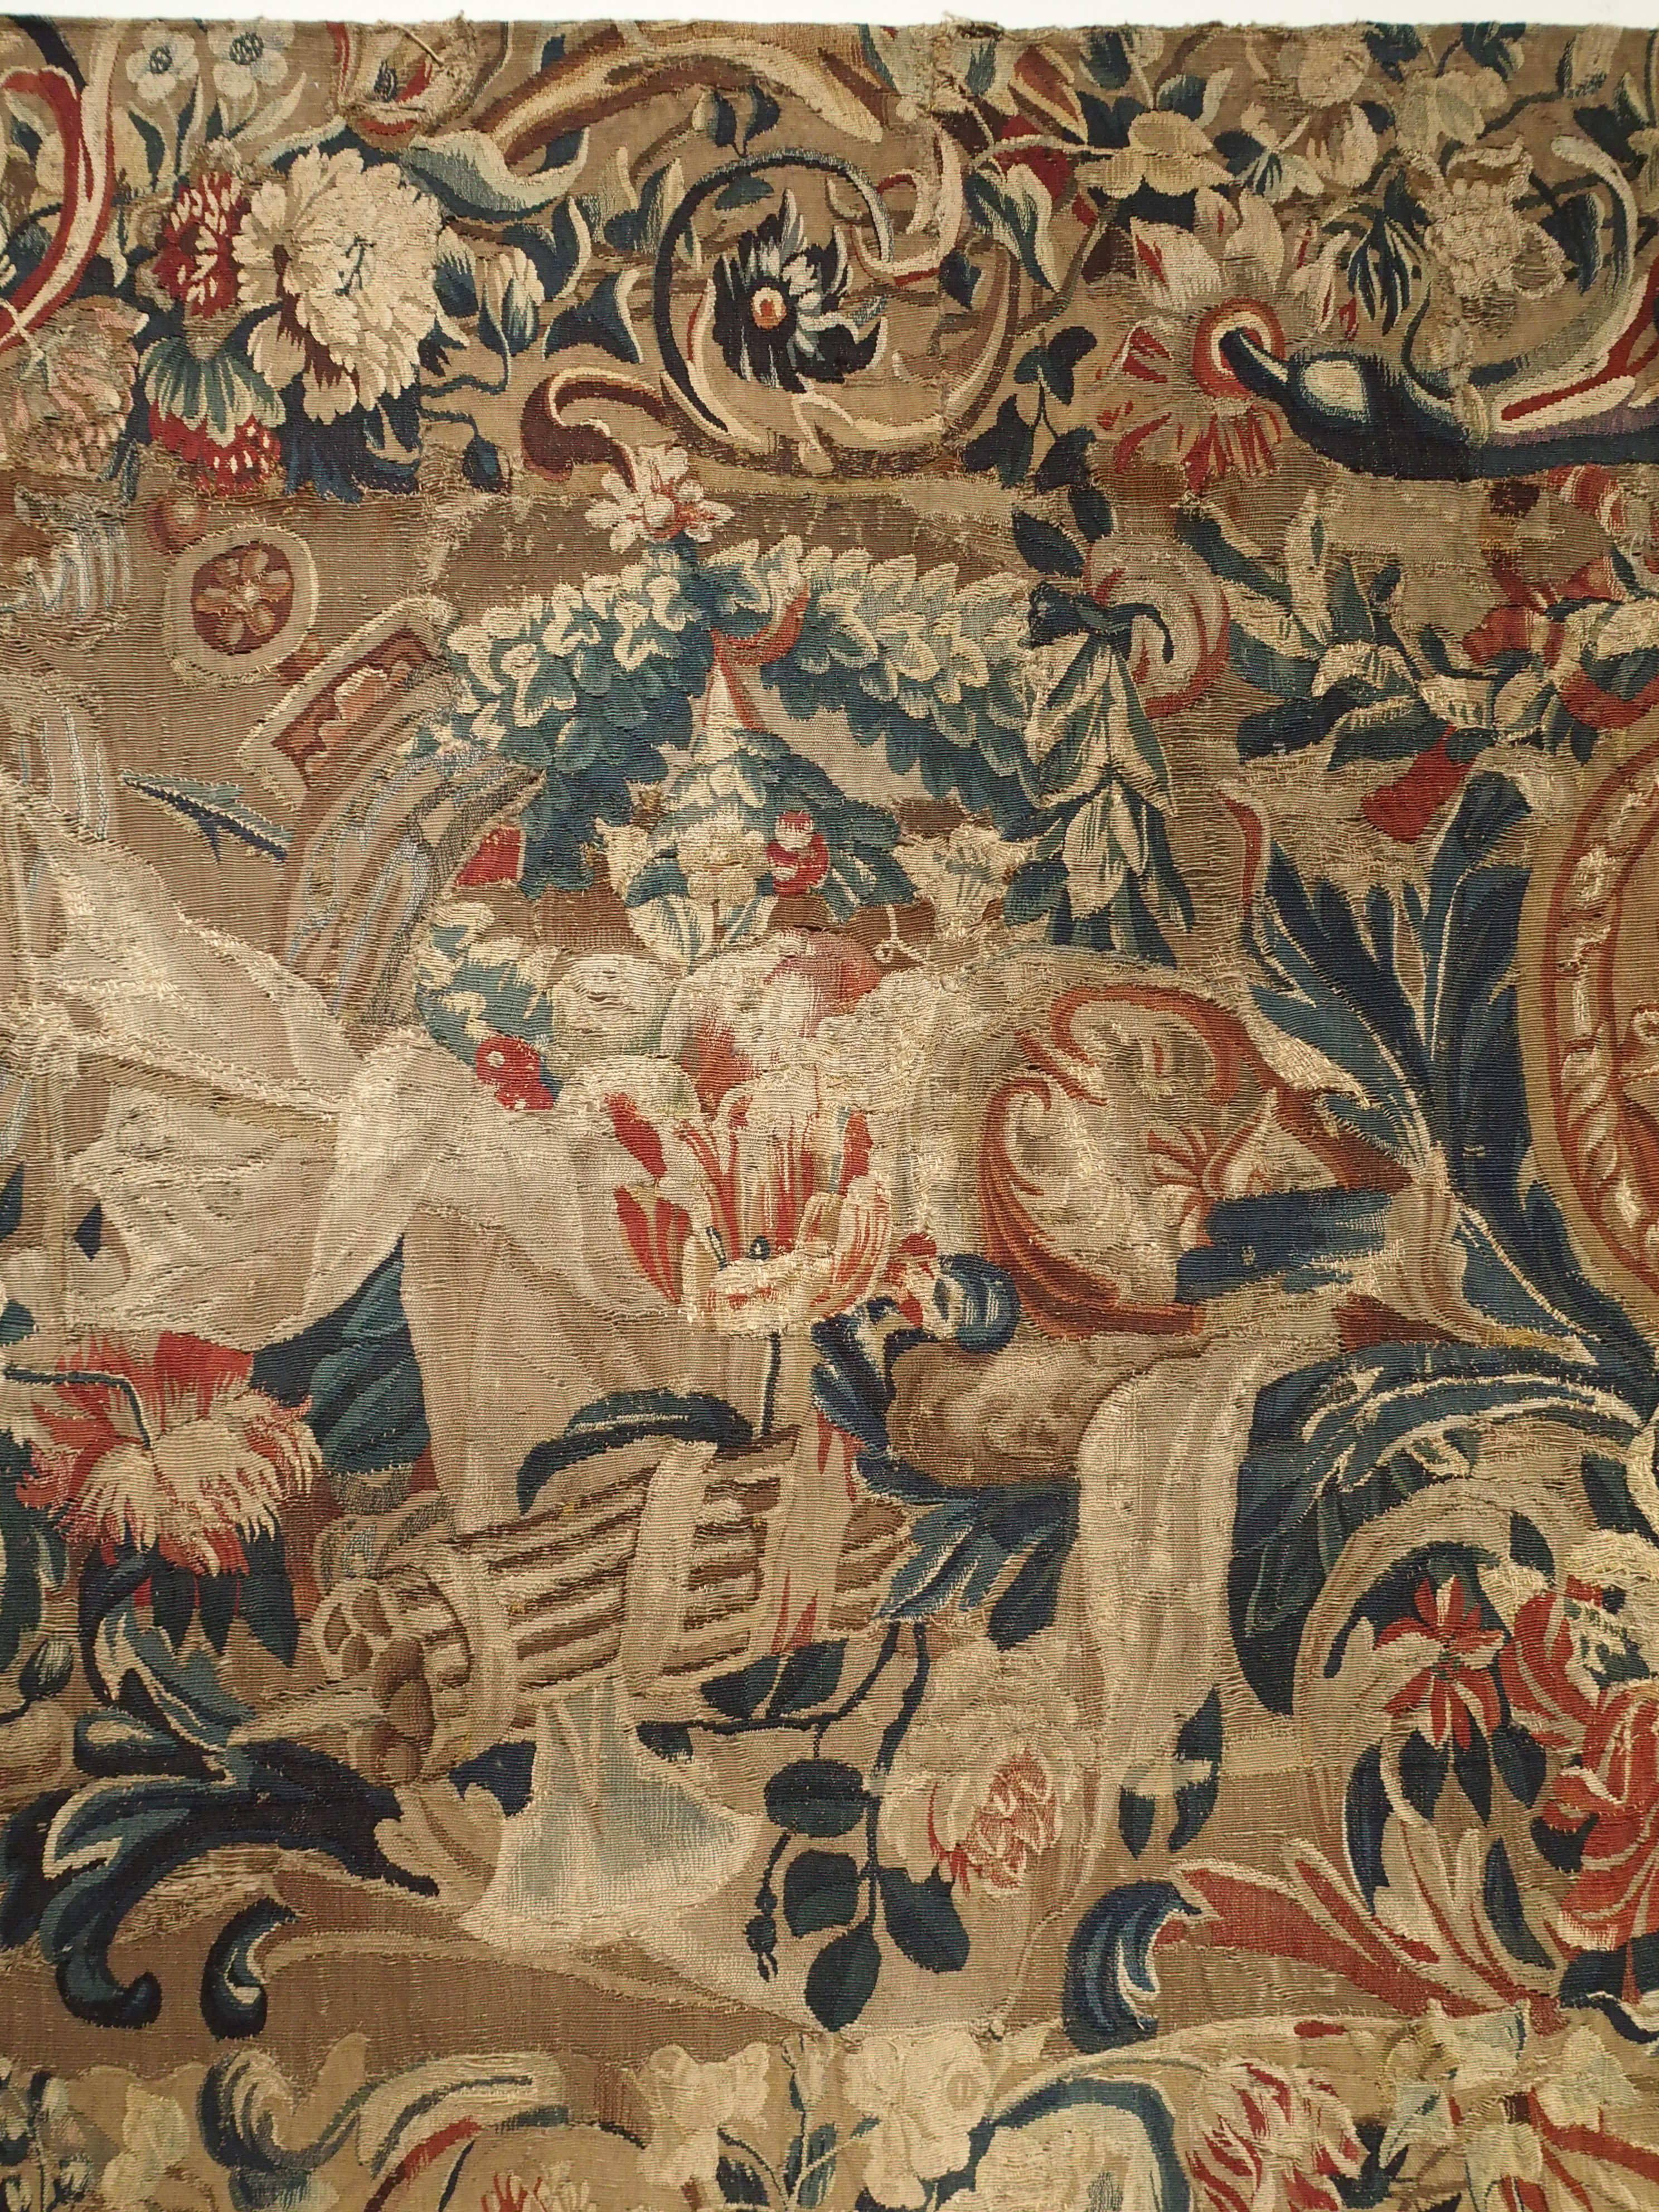 Hand-Woven Antique French Beauvais Tapestry from the Late 17th Century For Sale